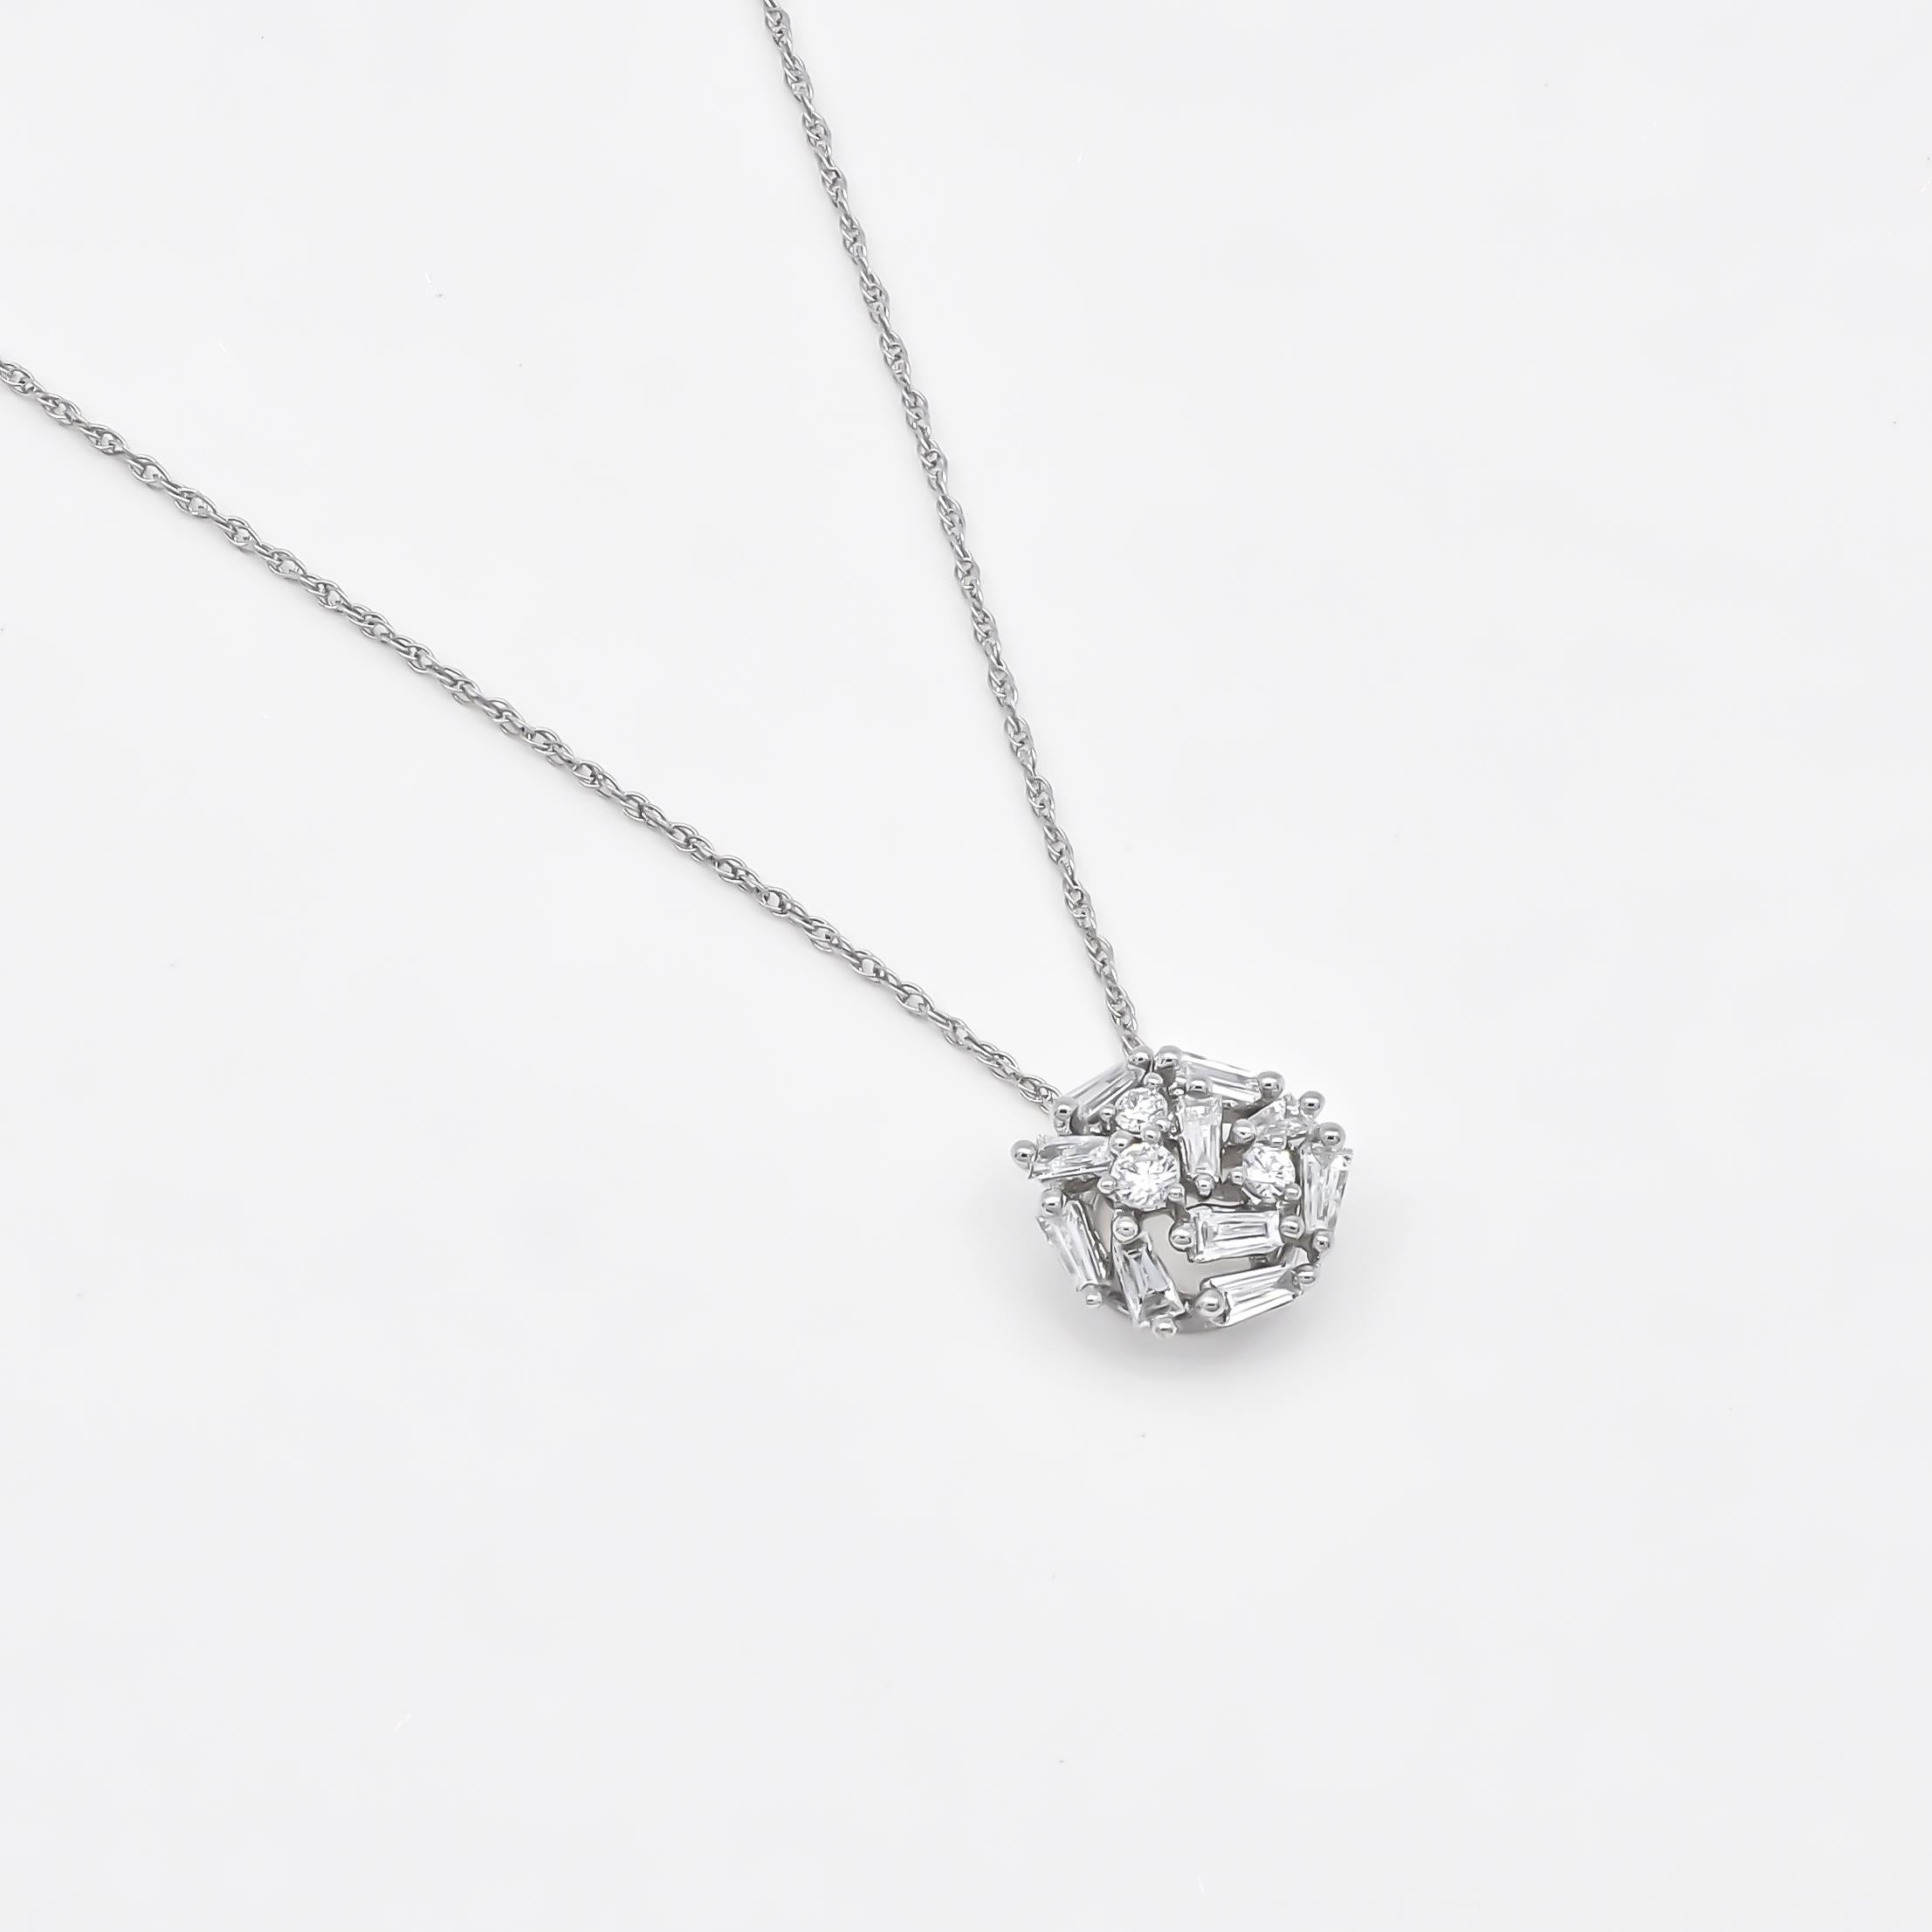 Indulge in the breathtaking beauty of this pendant necklace, adorned with a scattered cluster of round and baguette diamonds set in luxurious 18KT White Gold. Totaling 0.44 carats, the arrangement of diamonds in this pendant creates a dramatic and